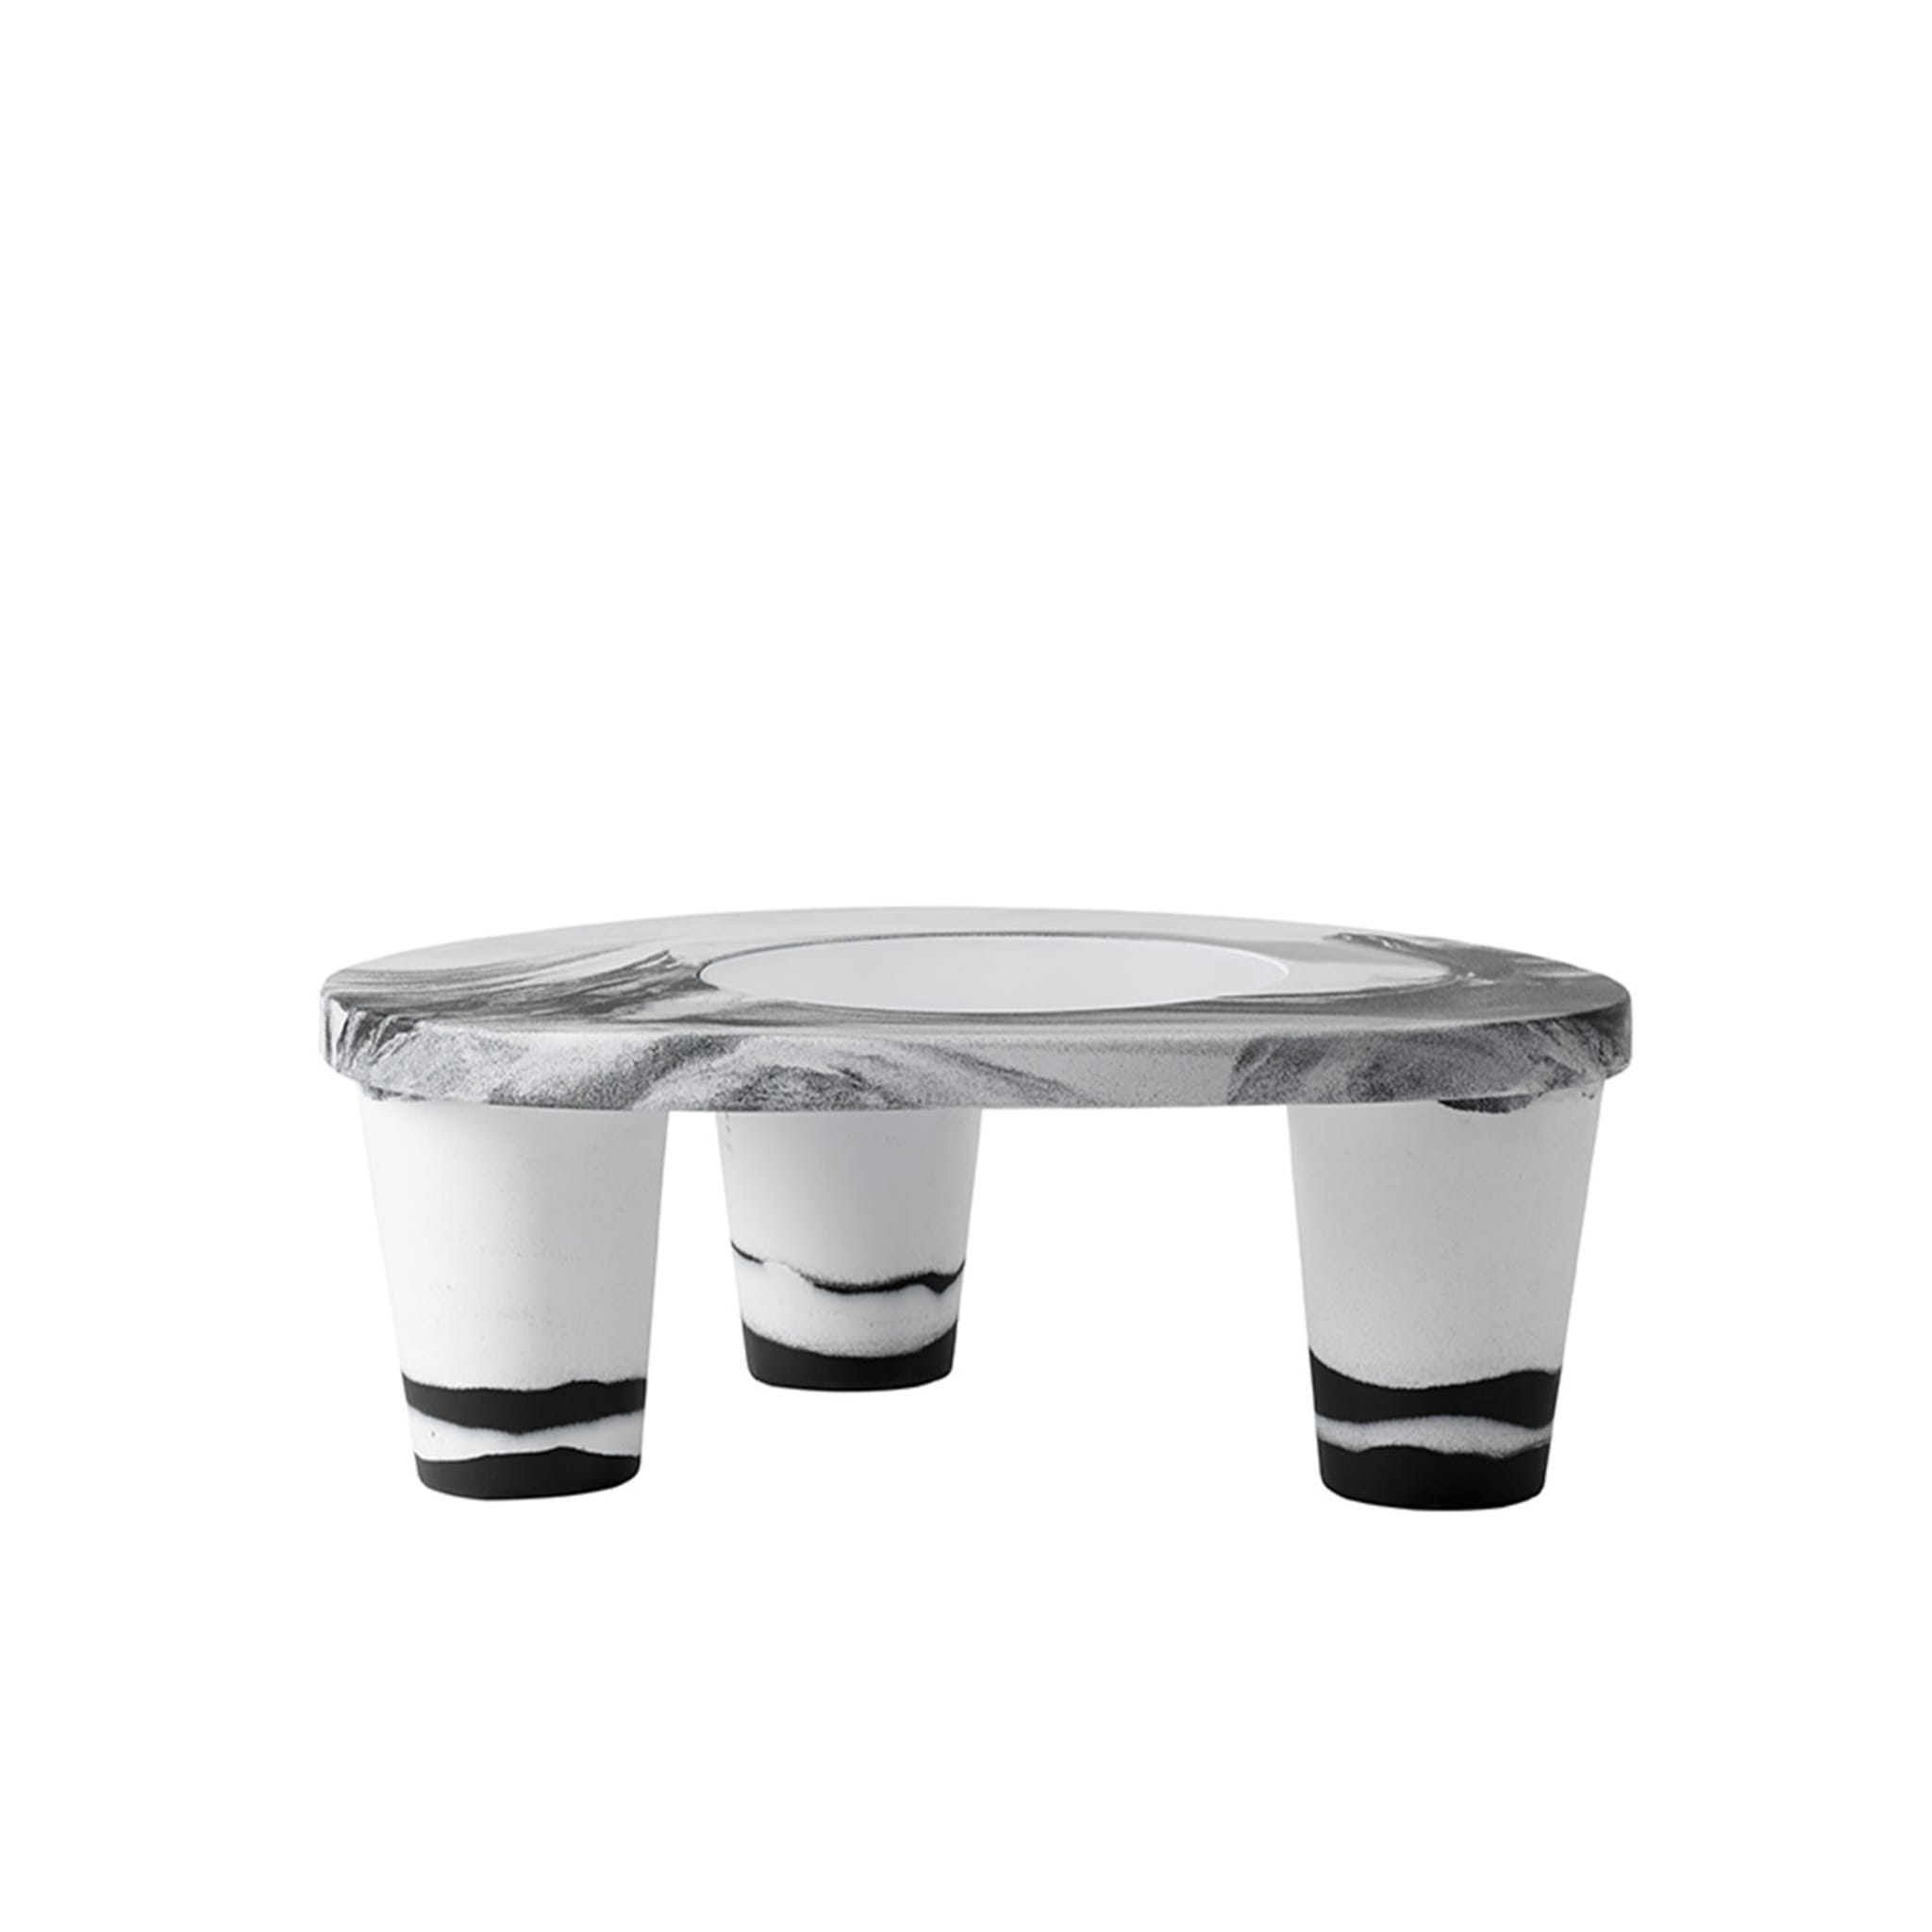 Low Lita Table 10th Anniversary by Paola Navone - Alternative view 1